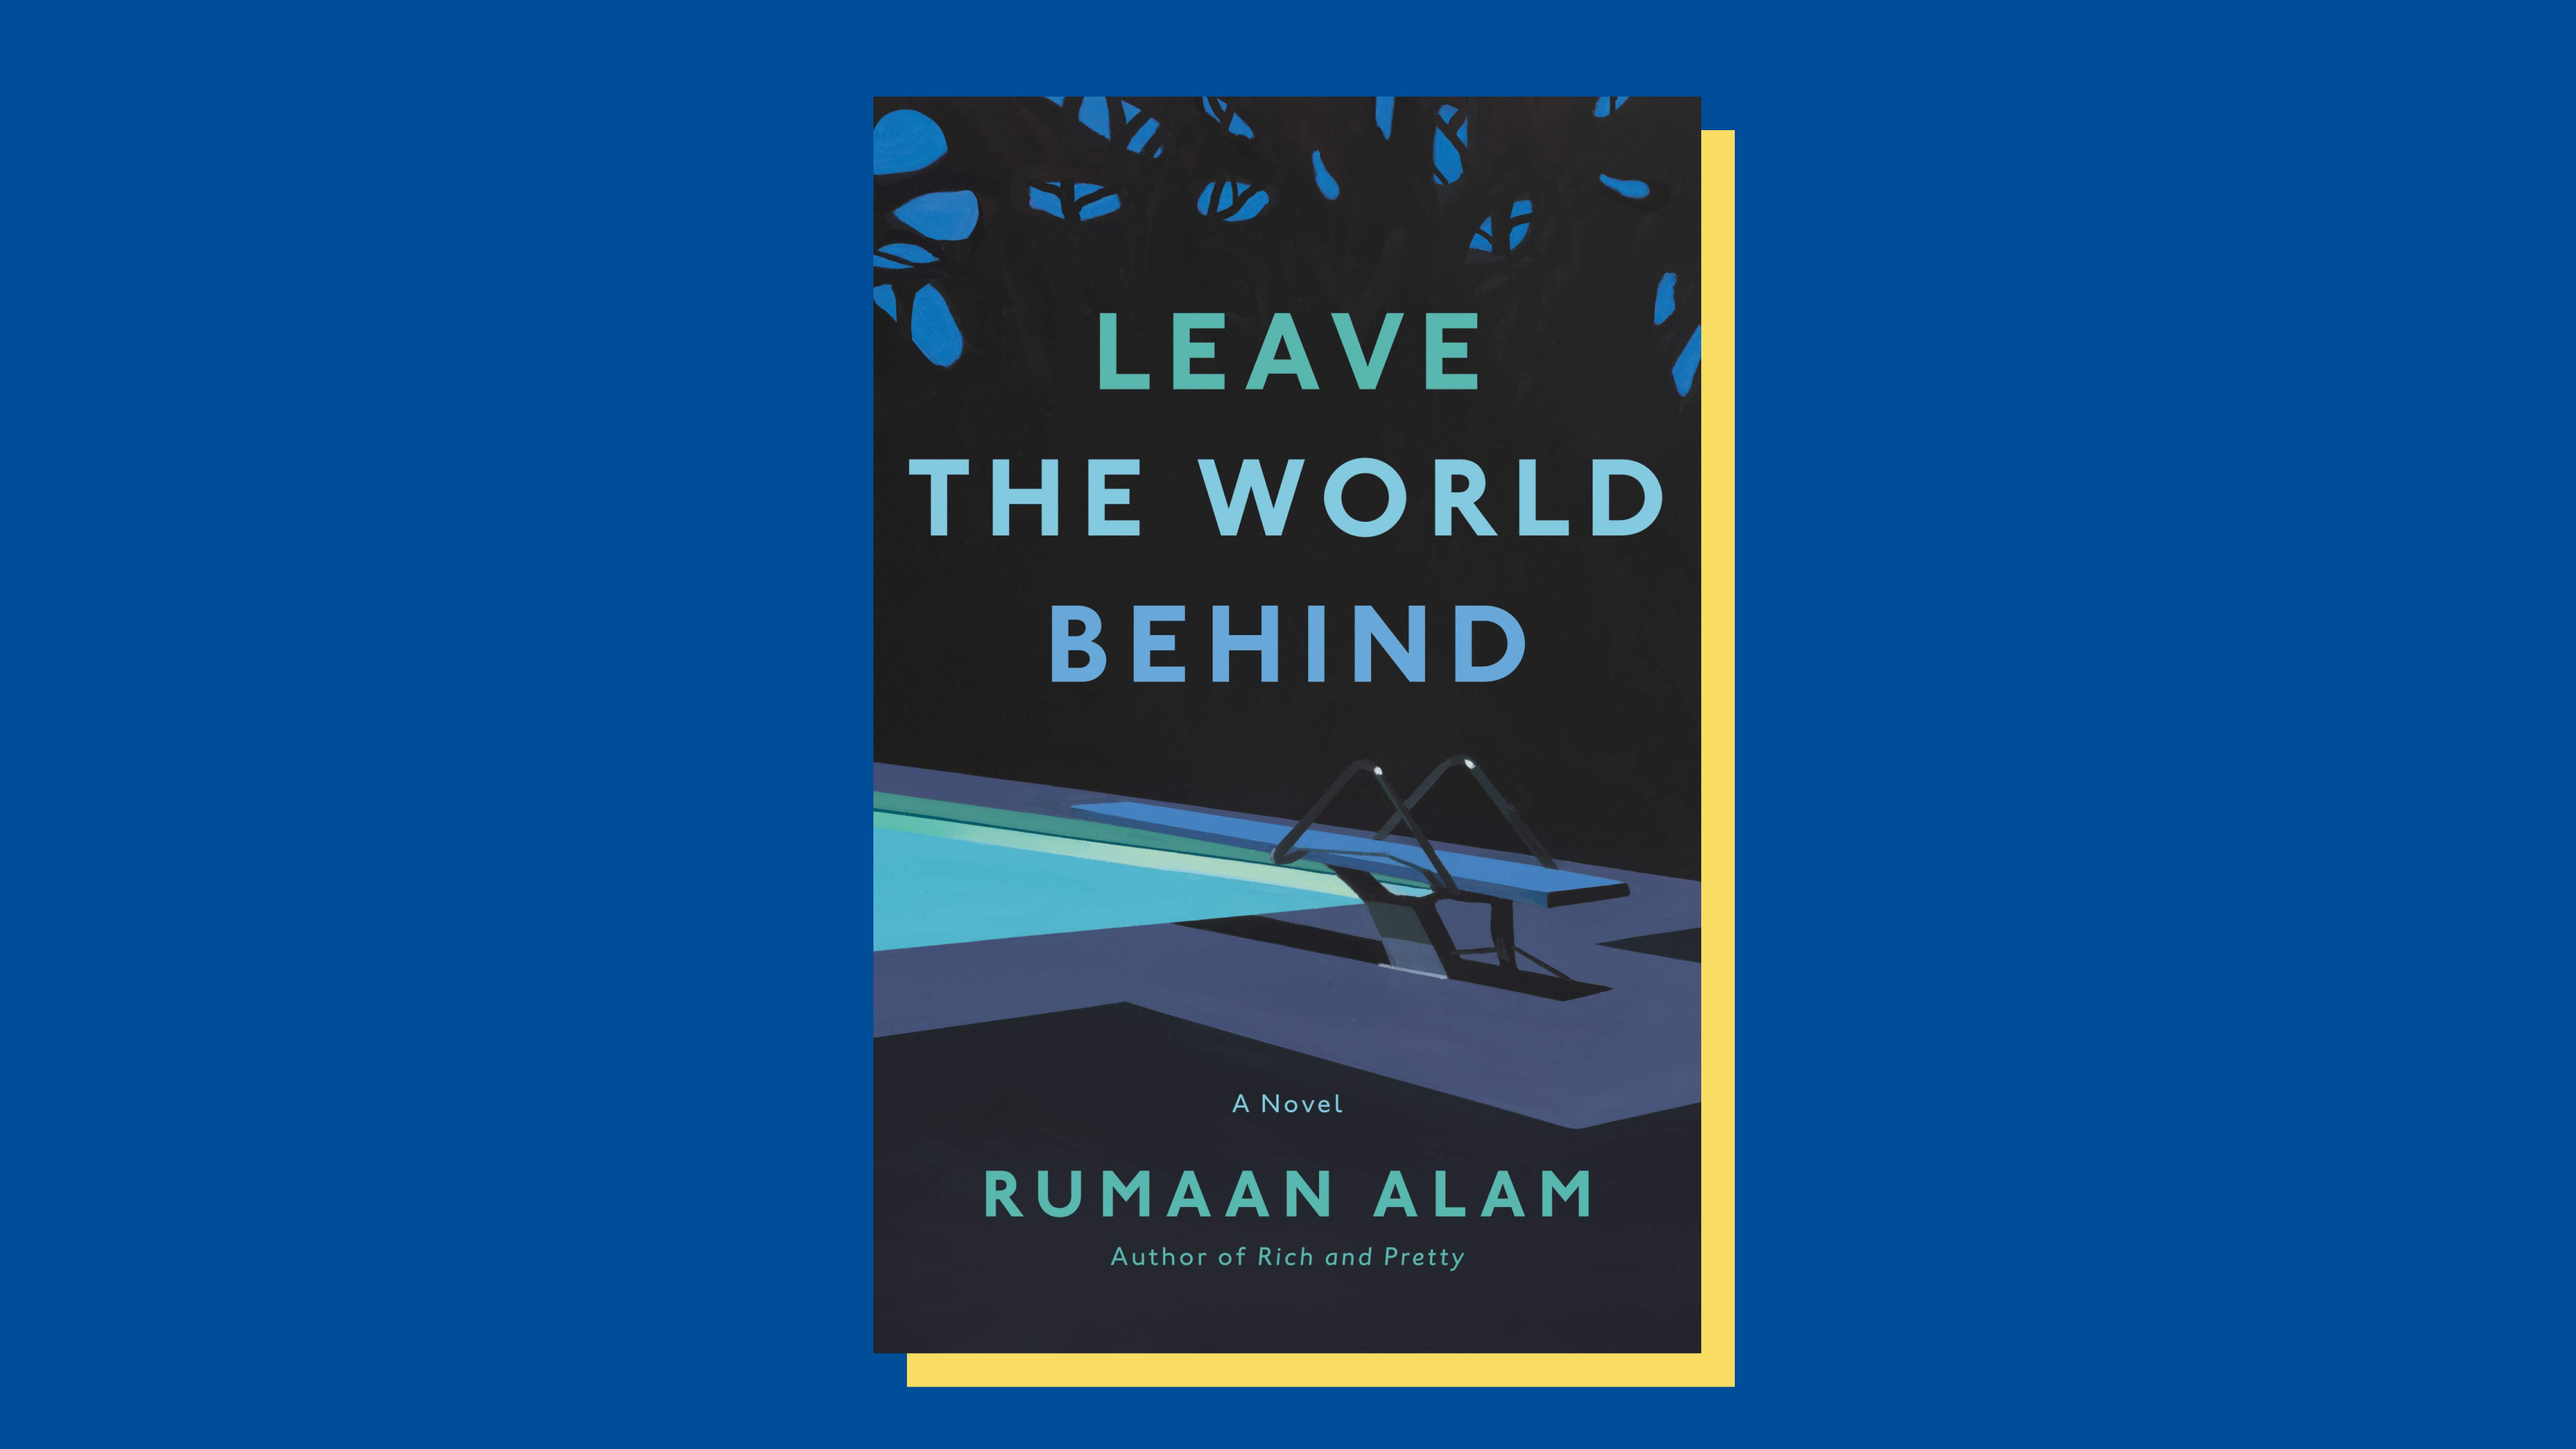 “Leave the World Behind” by Rumaan Alam